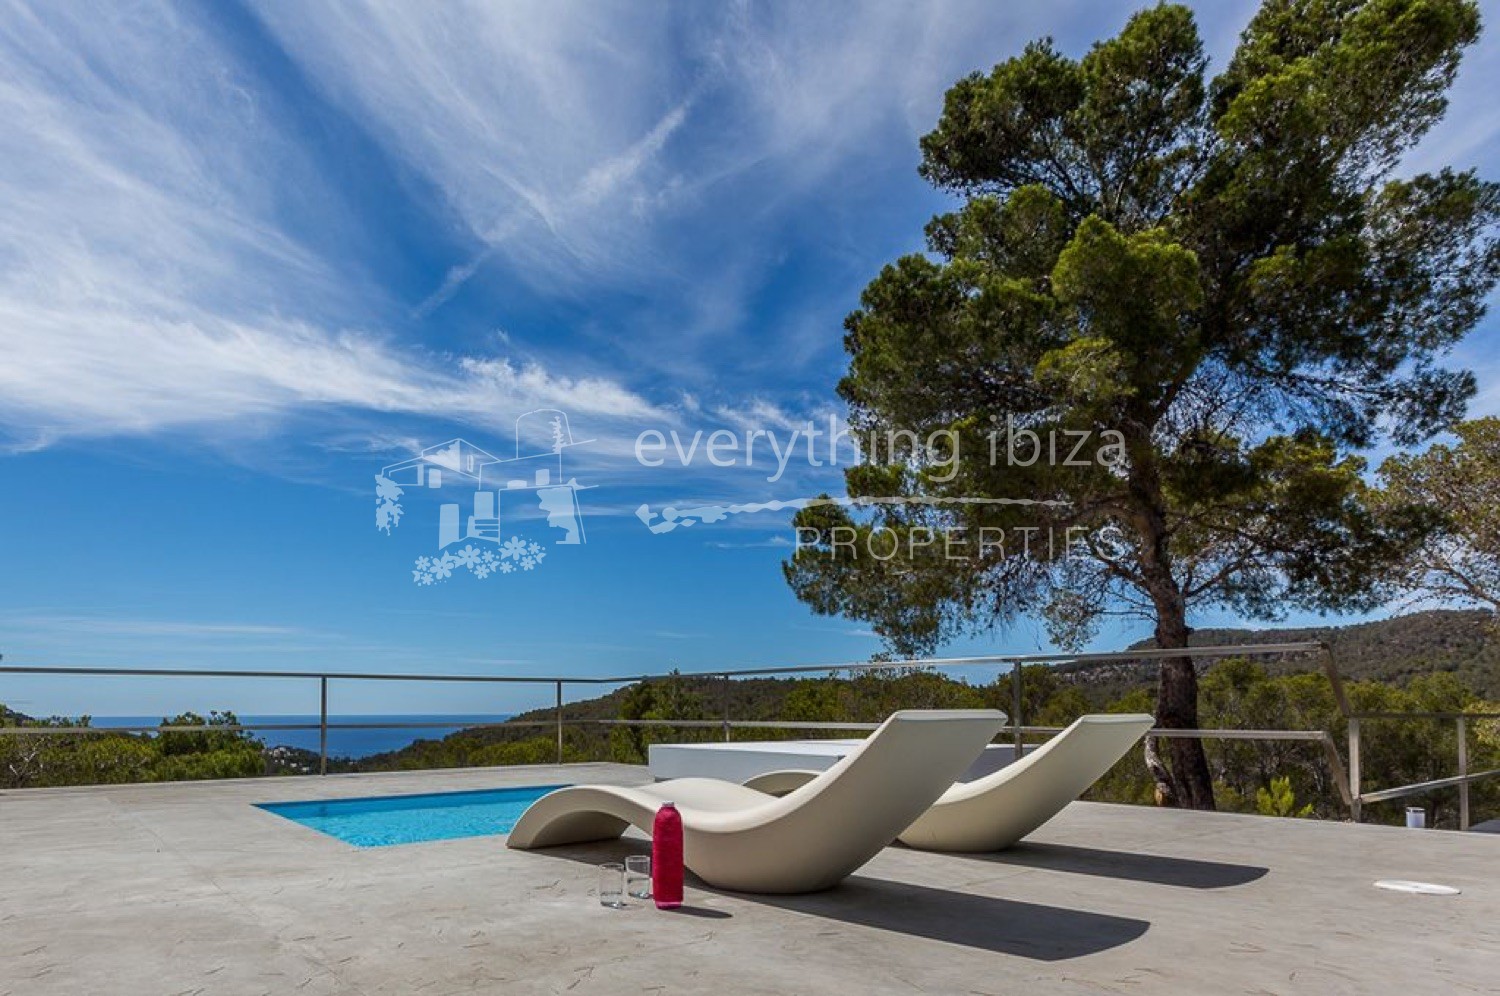 Stunning Contemporary Villa with Views, ref. 1297, for sale in Ibiza by everything ibiza Properties